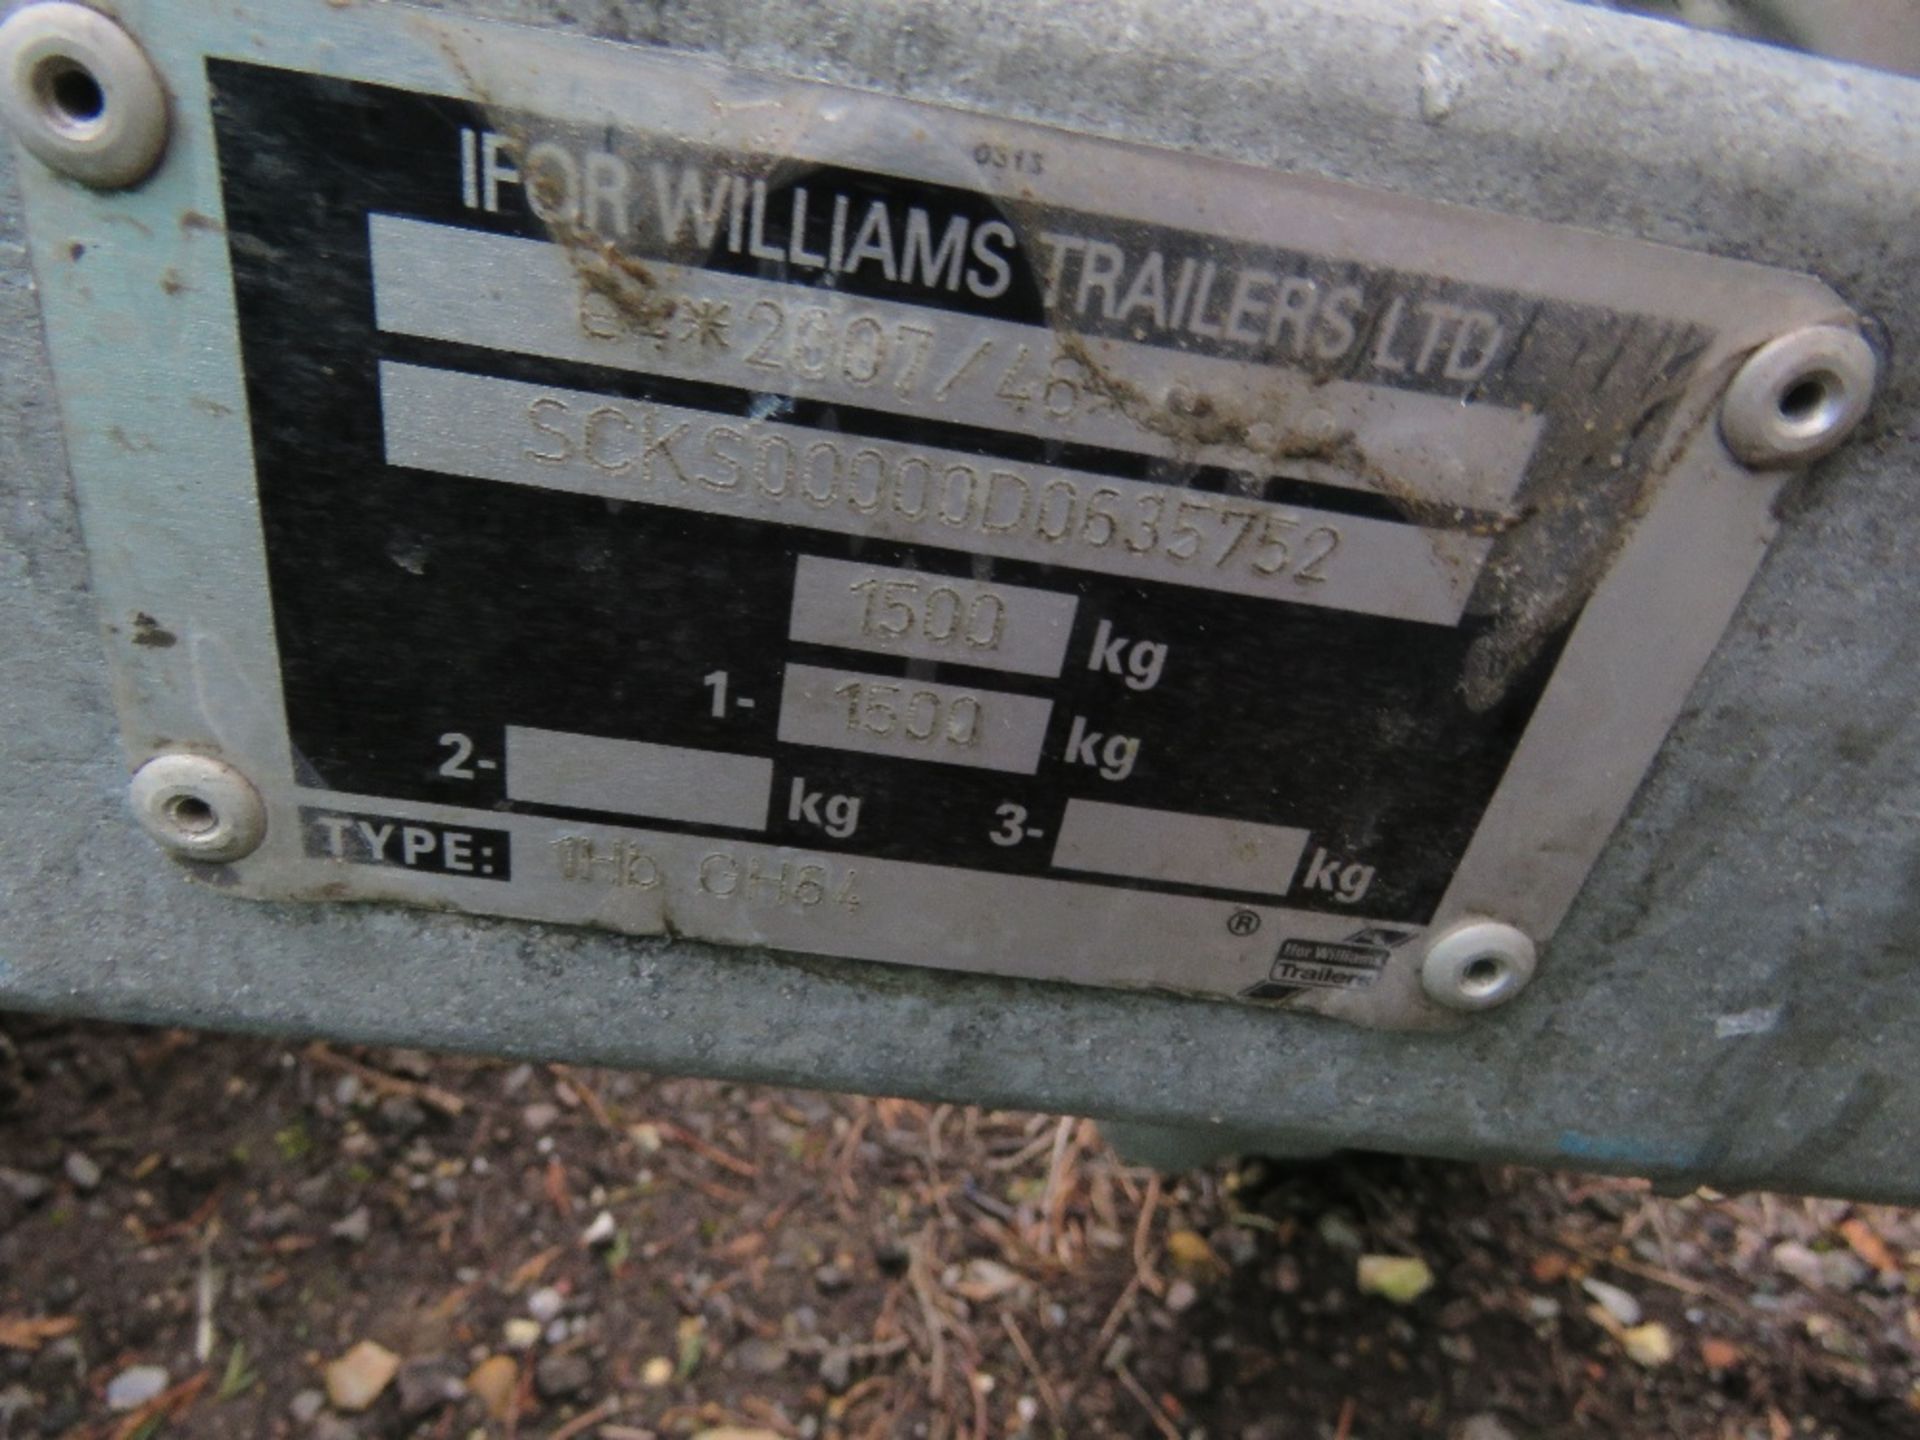 IFOR WILLIAMS GH64 SINGLE AXLE MICRO EXCAVATOR TRAILER WITH KEYS, HITCH LOCK AND INSTRUCTION BOOK. V - Image 4 of 6